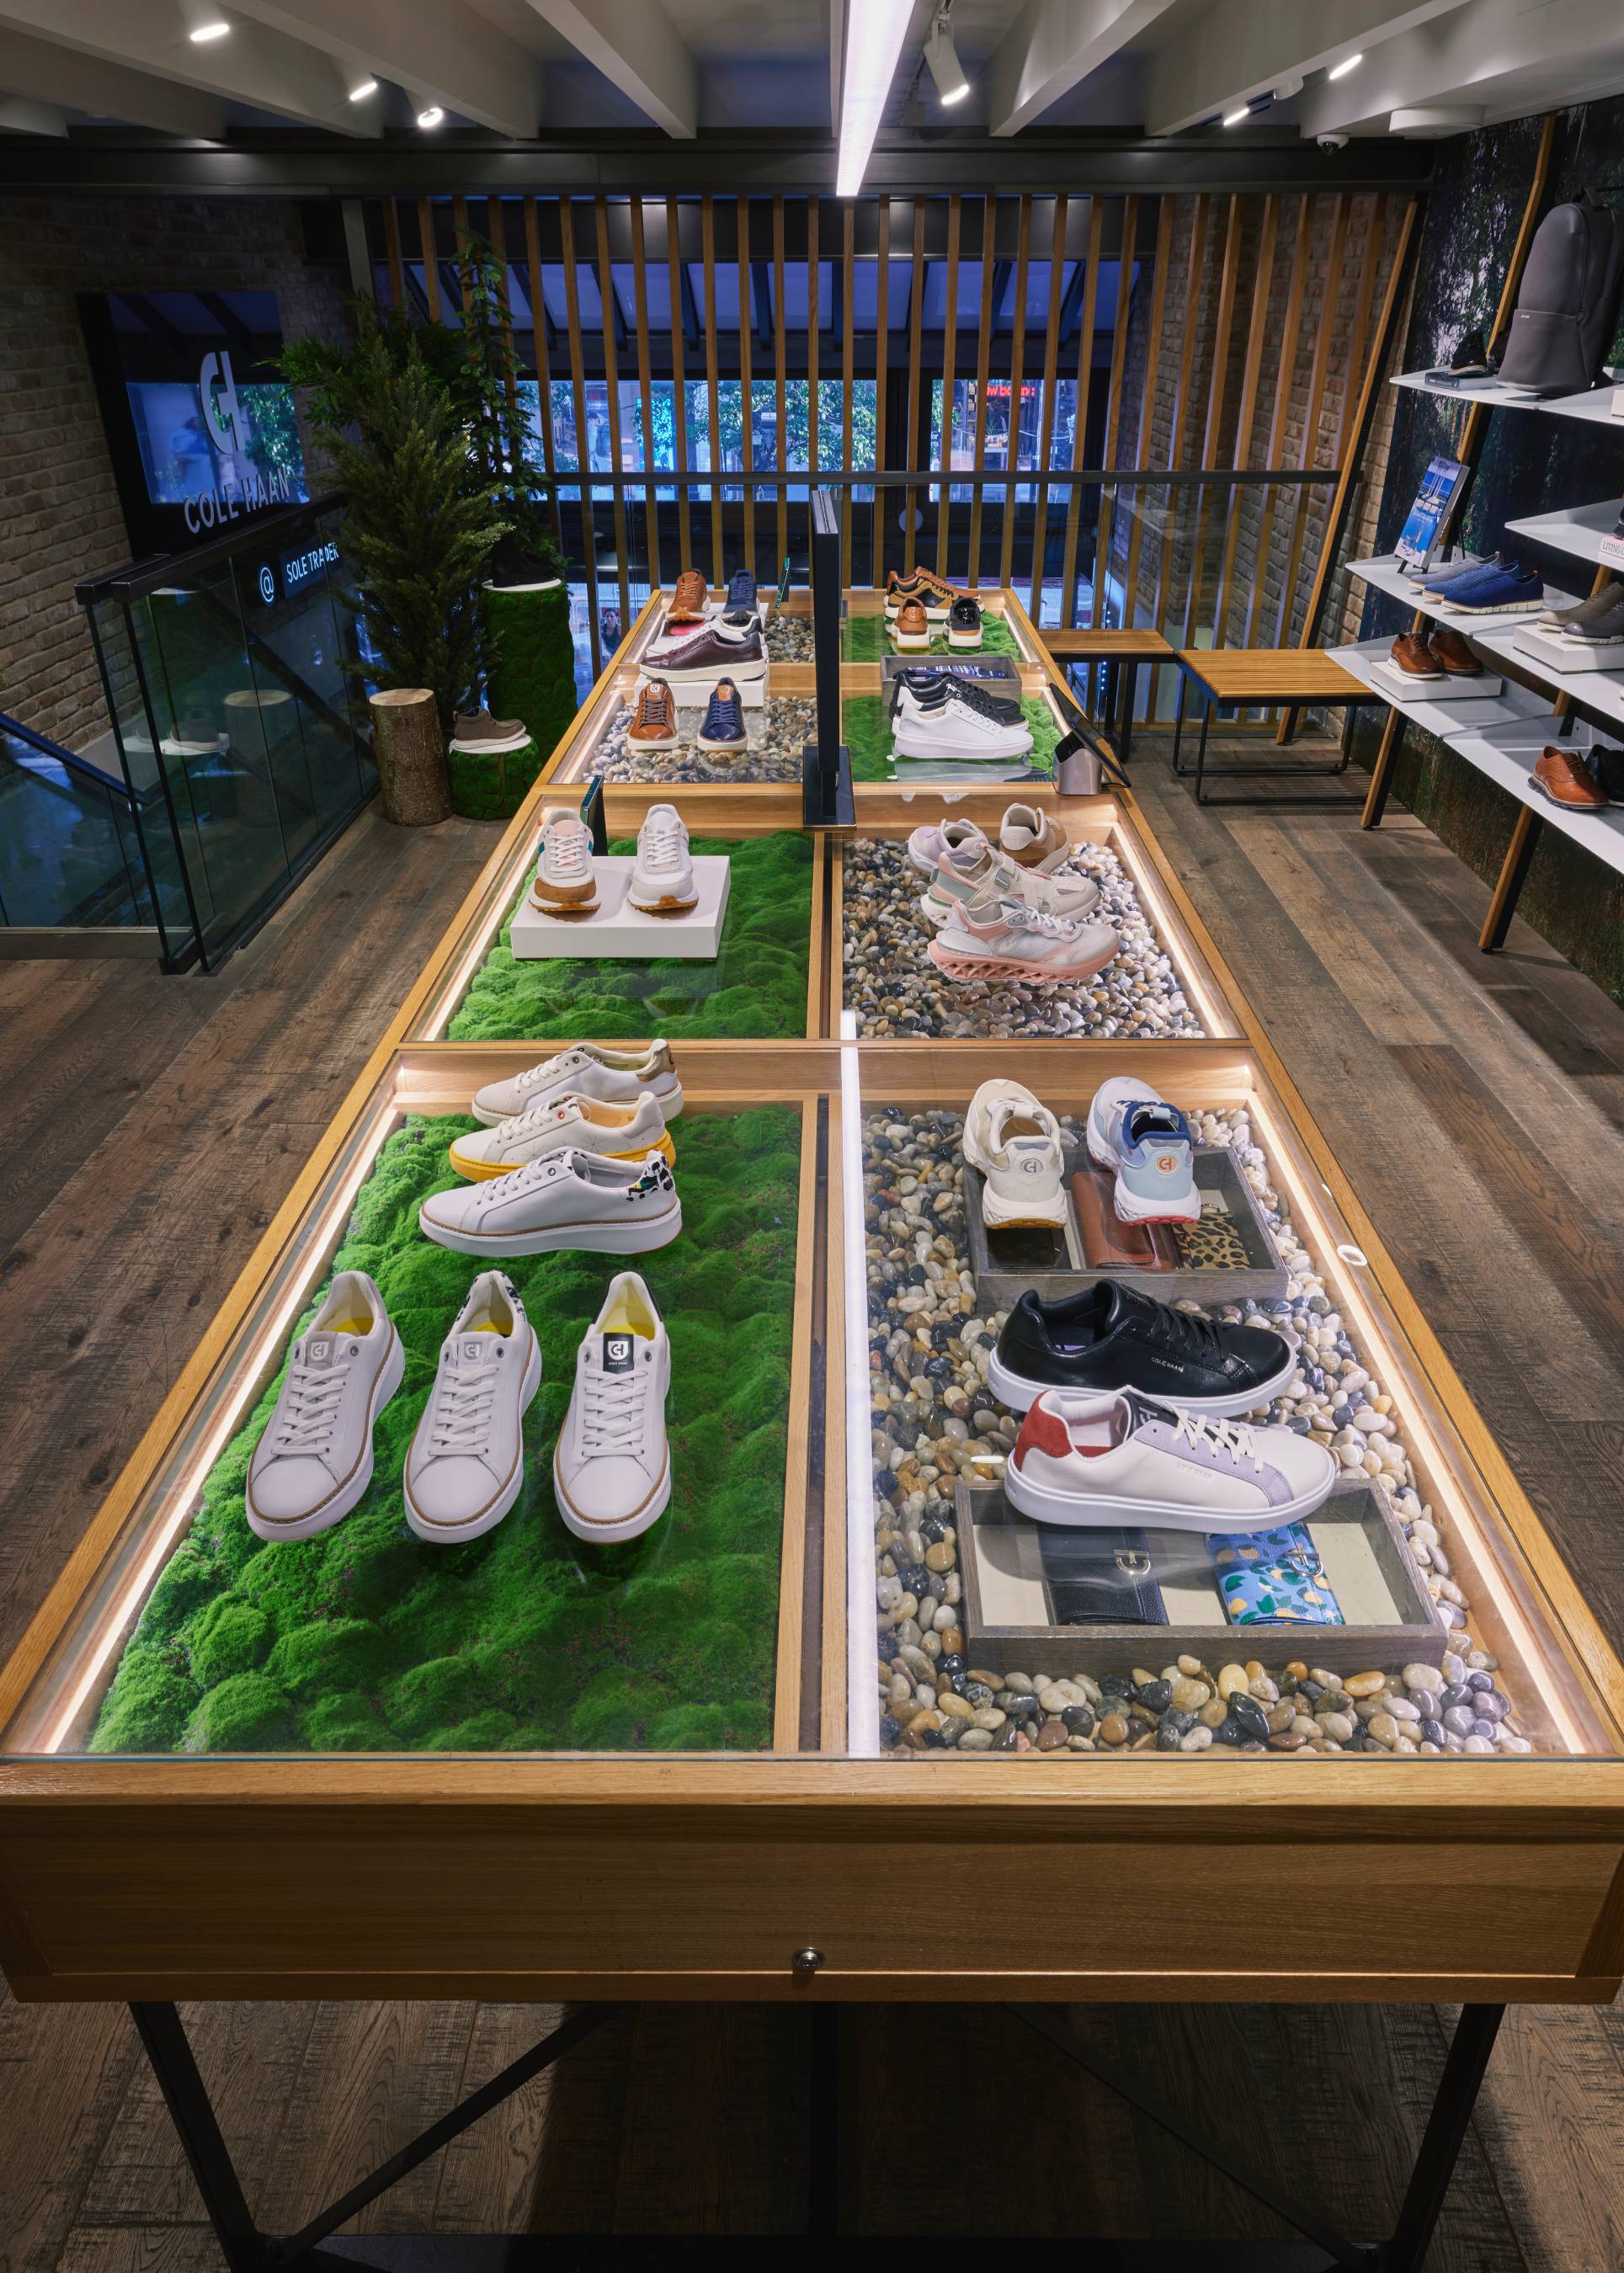 Cole Haan Opens First UK Shop-in-Shop At SOLE | TRADER's London Location To Further The Brand's International Presence